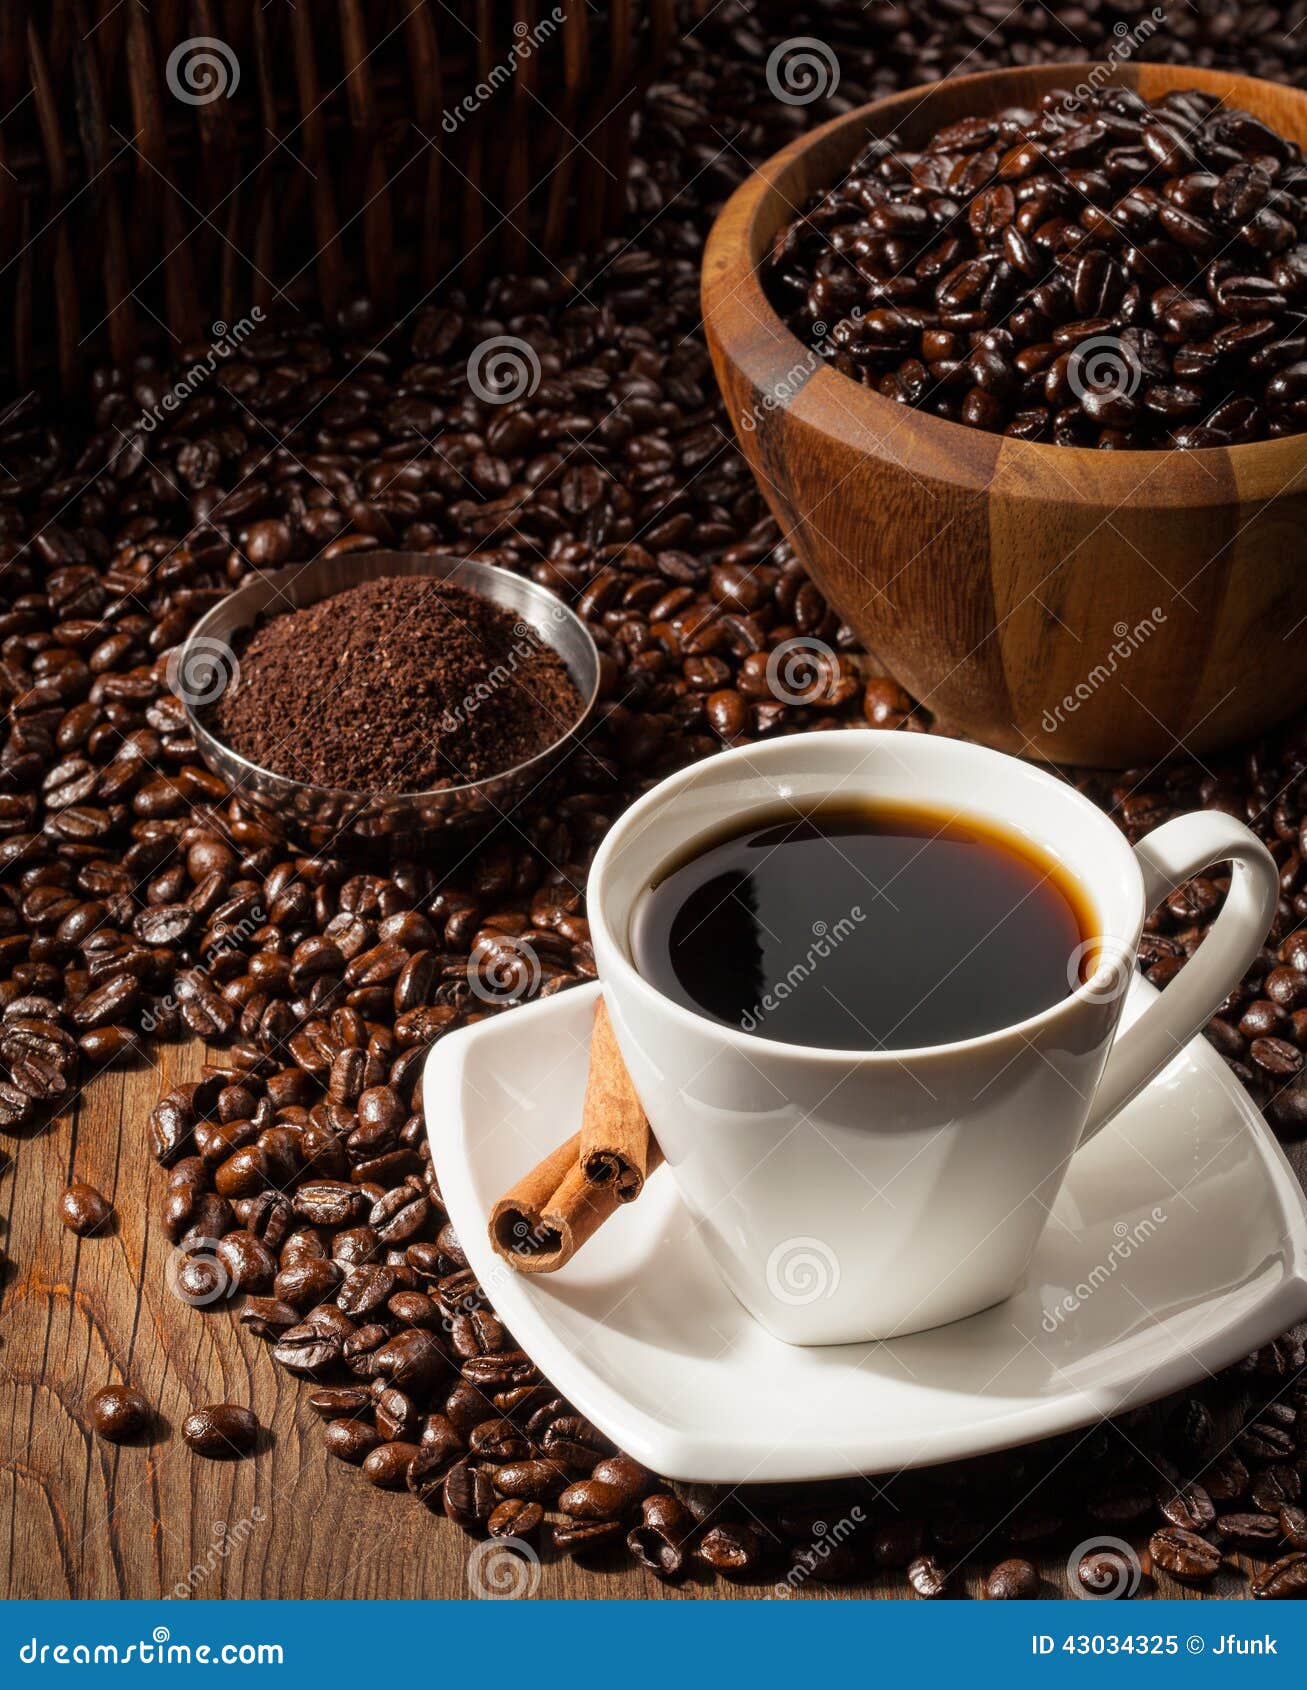 Cup Of Black Coffee With Beans Stock Photo - Image: 43034325